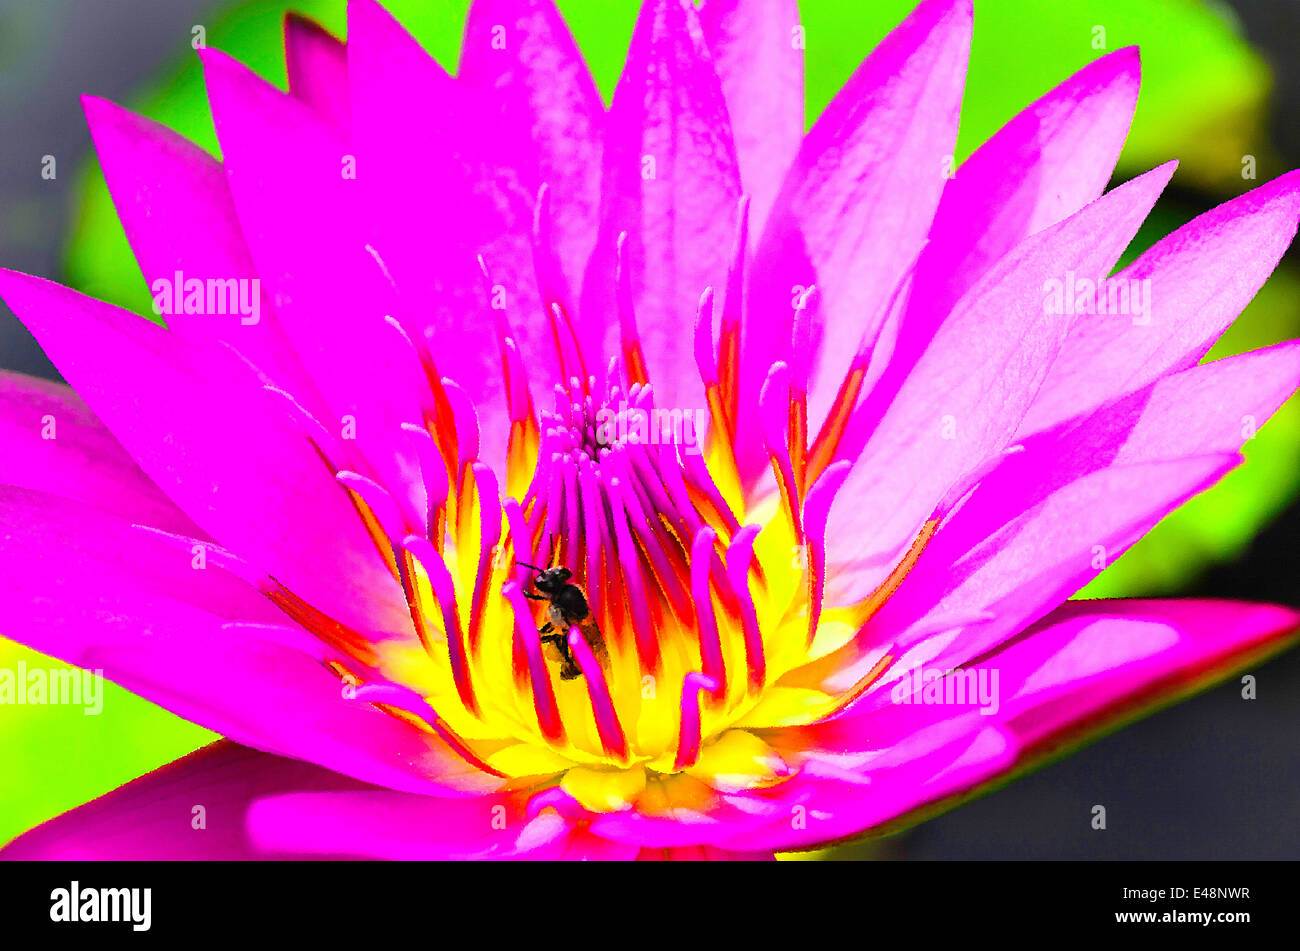 The lotus or water lily in pink-purple with yellow-pink pollen and Bug - Oil Painting from Photo. Stock Photo